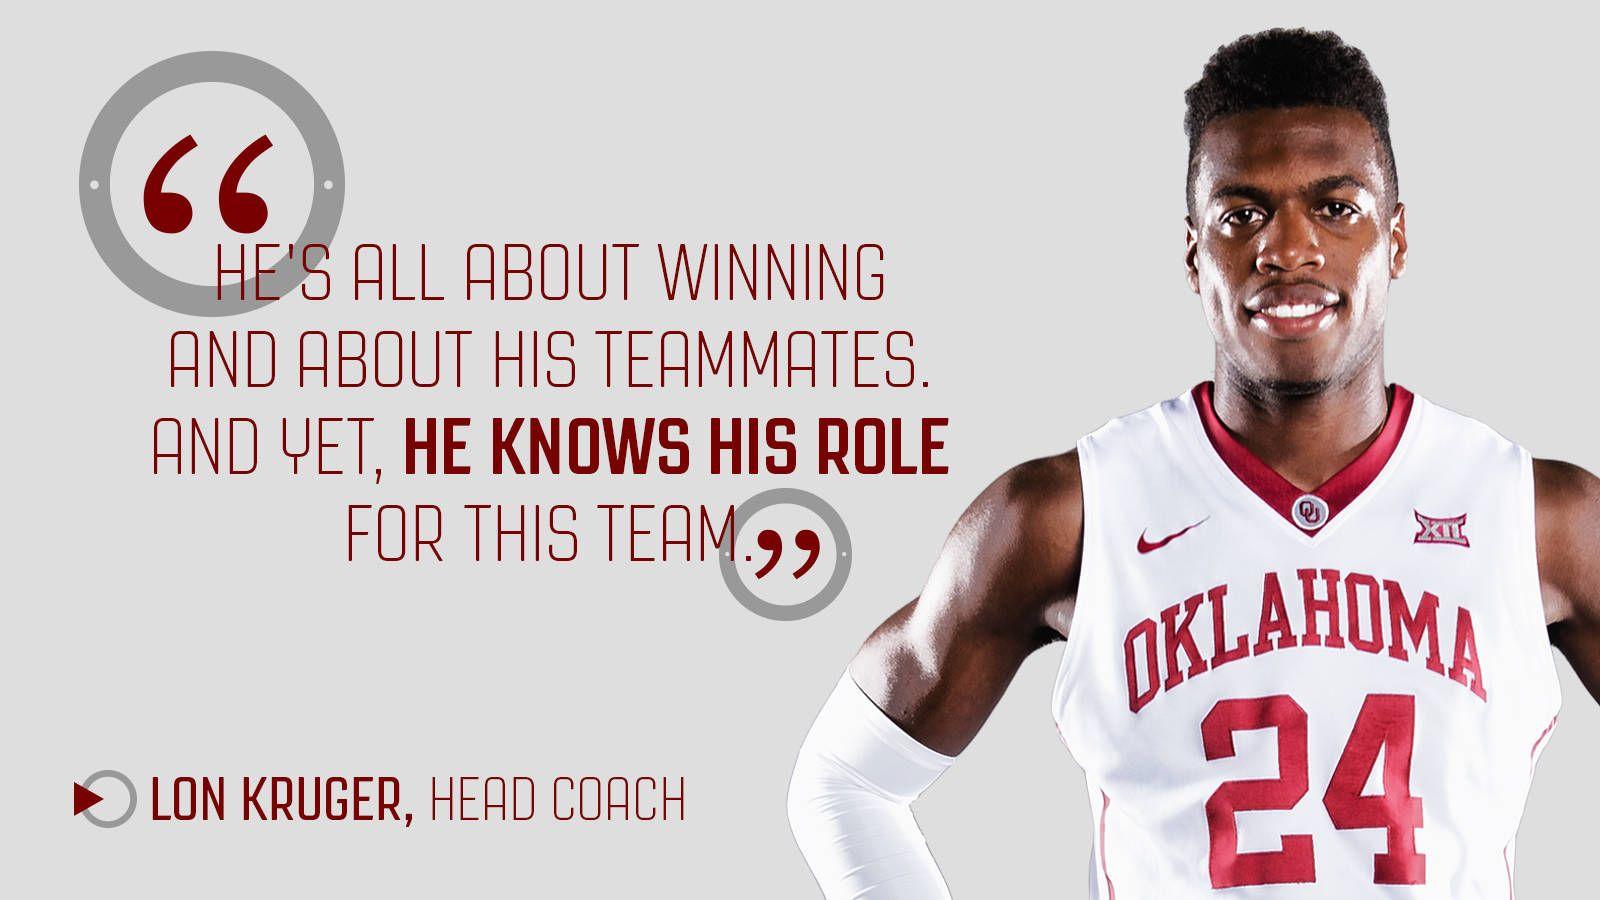 In Others' Words: Buddy Hield